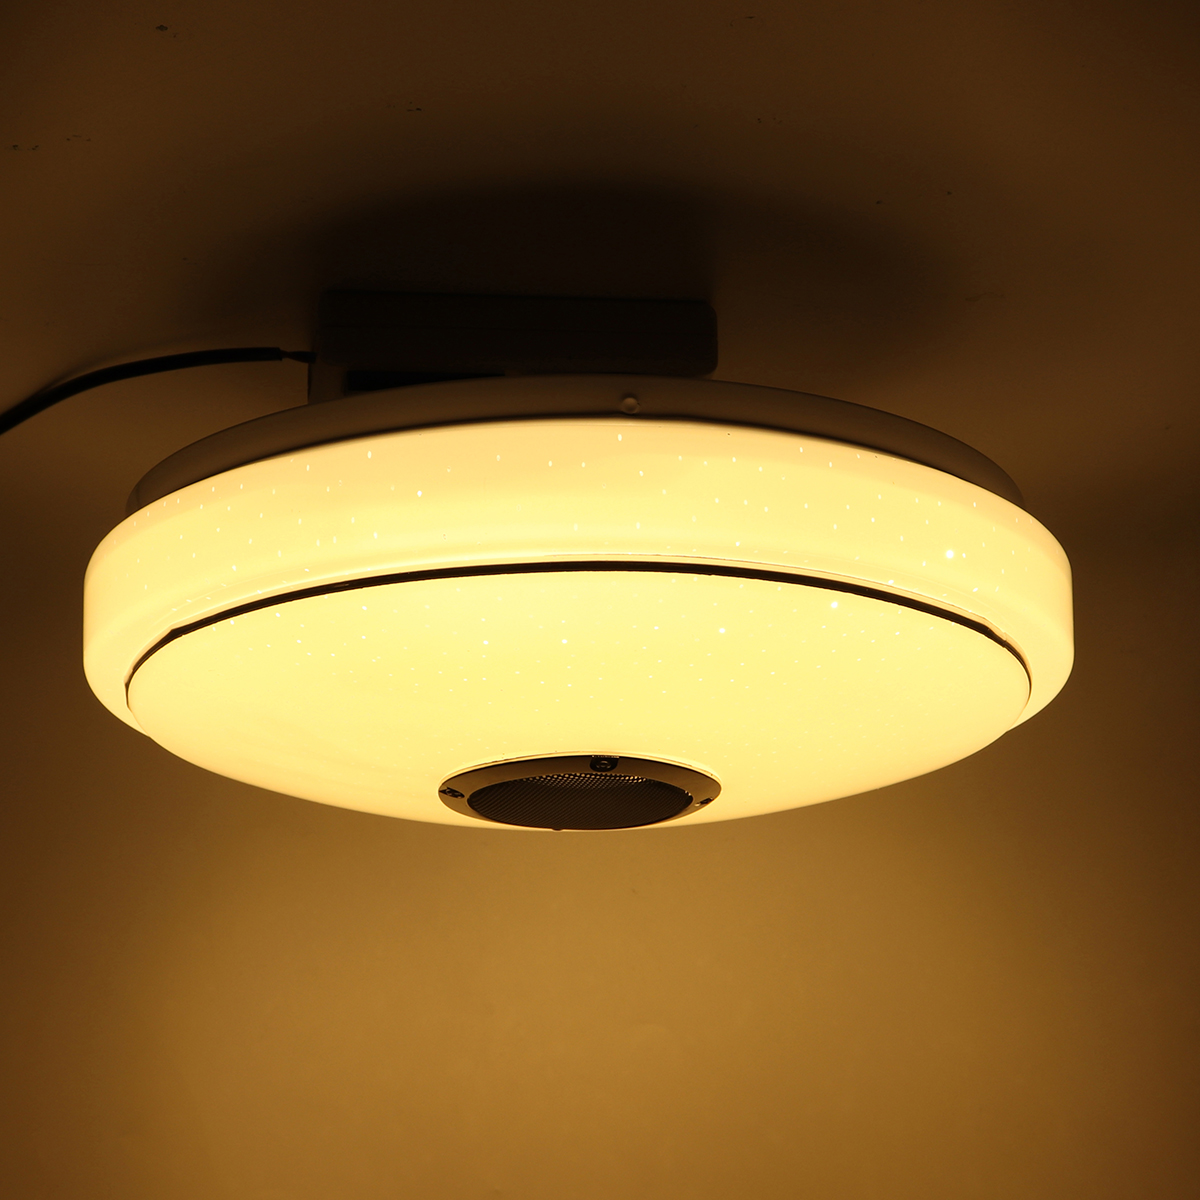 Dimmable-RGBW-LED-Music-Ceiling-Lights-with-bluetooth-Speaker-Cellphone-APP-Control-Color-Changing-L-1742404-12